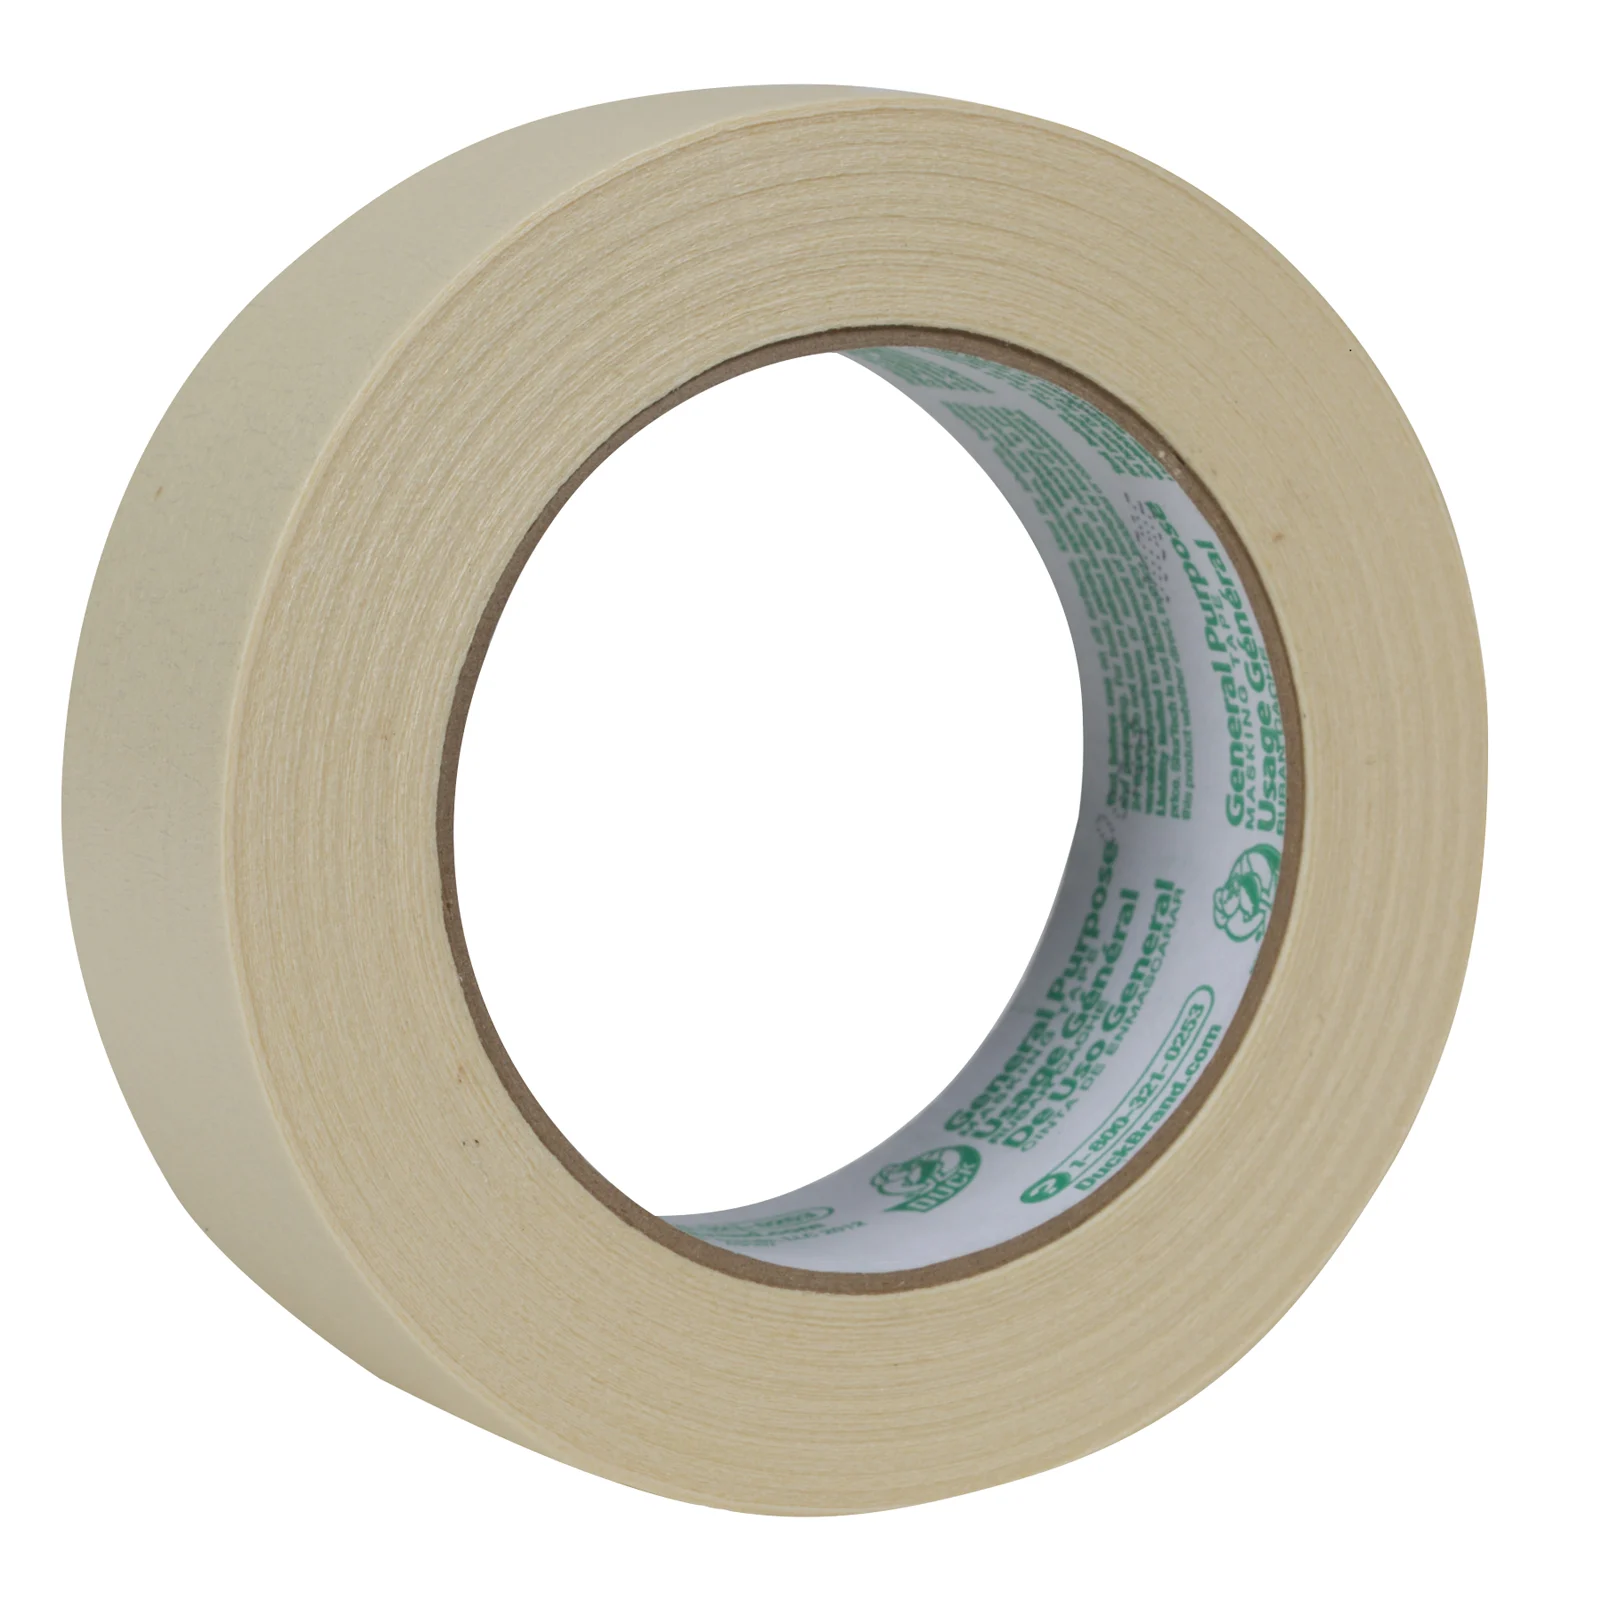 Cantech Indoor/Outdoor Double-Sided Carpet Tape, Weather & Water